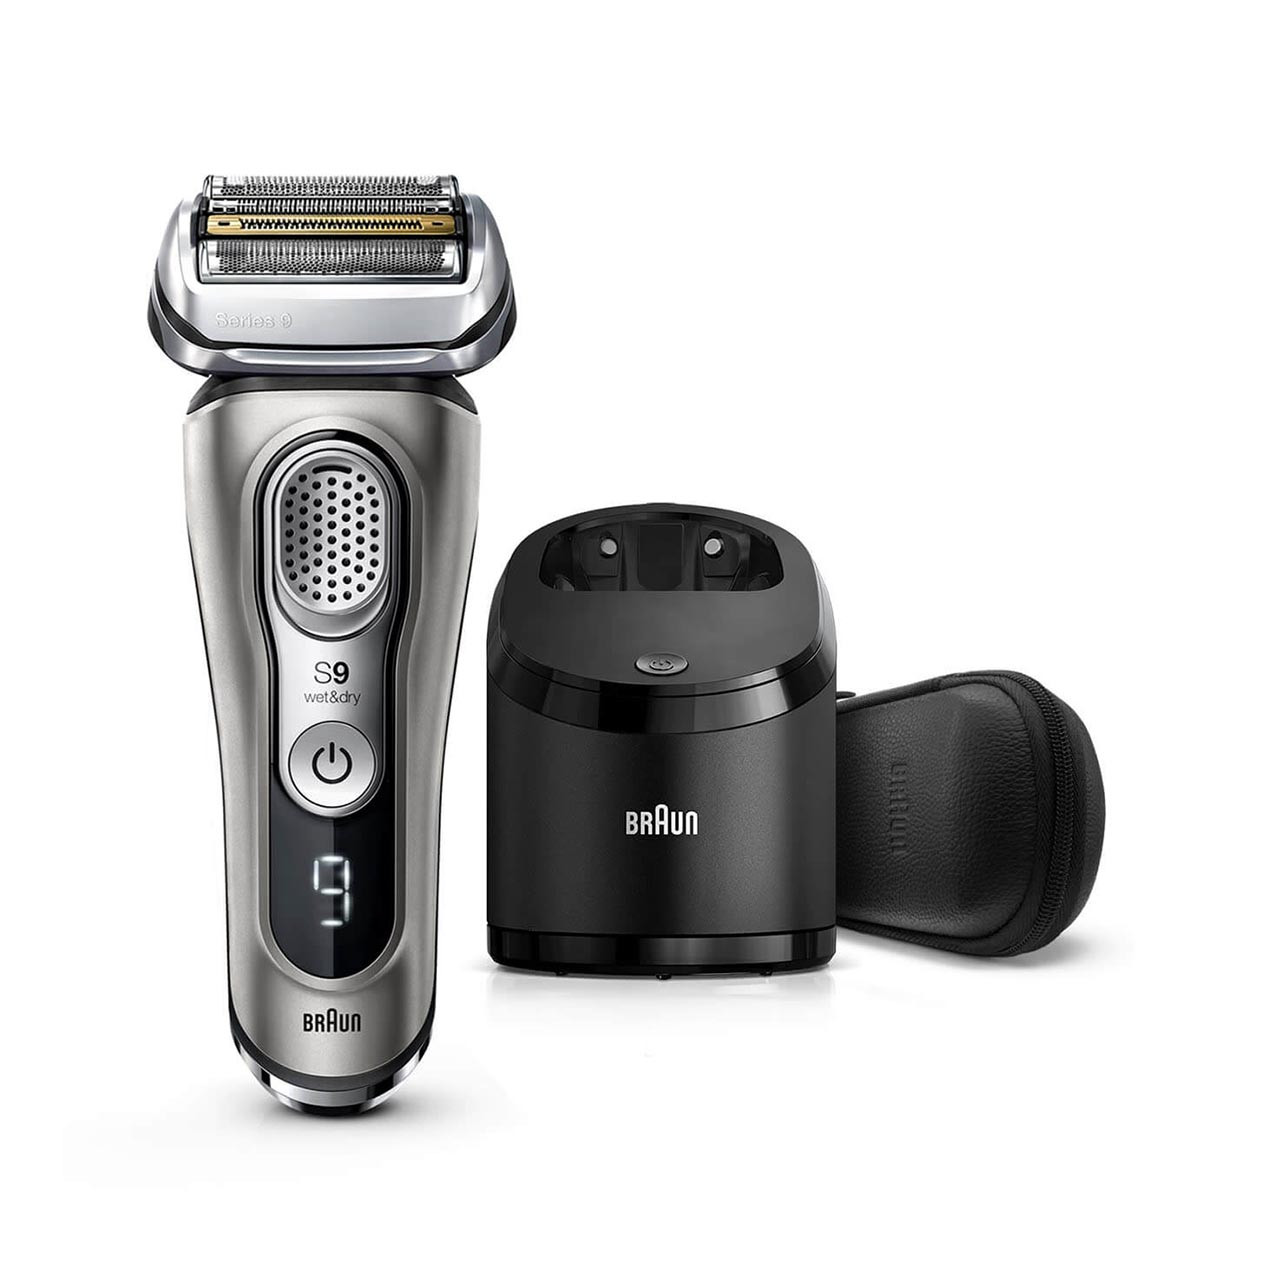 Braun Series 9 9385cc Wet and Dry Electric Shaver with Clean and Charge  Station